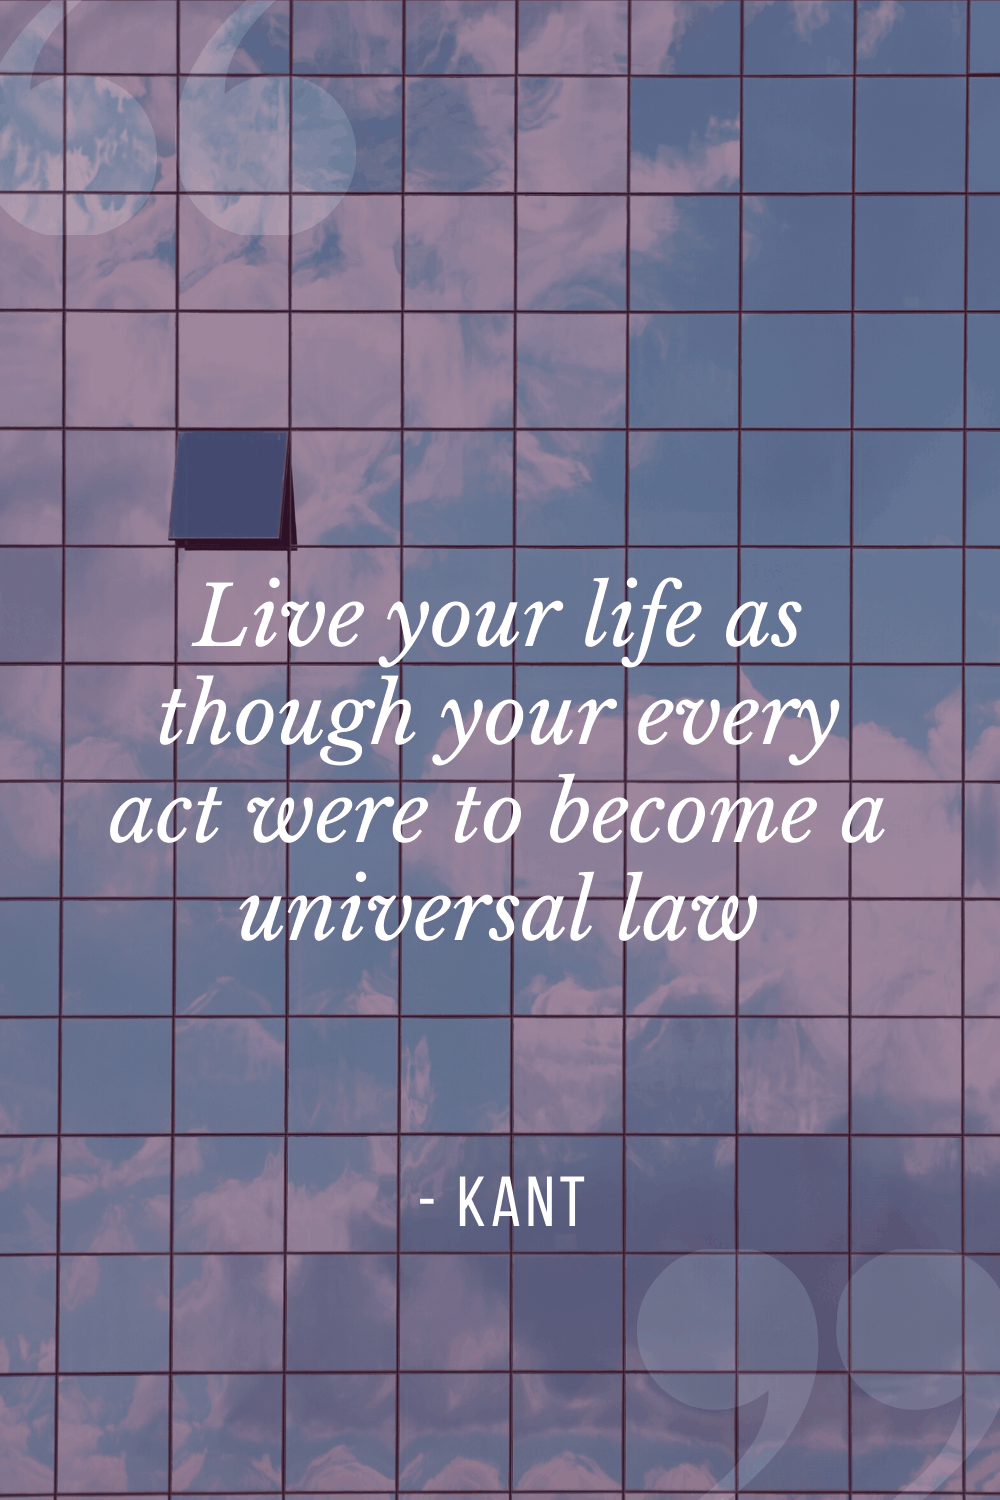 “Live your life as though your every act were to become a universal law”, Immanuel Kant